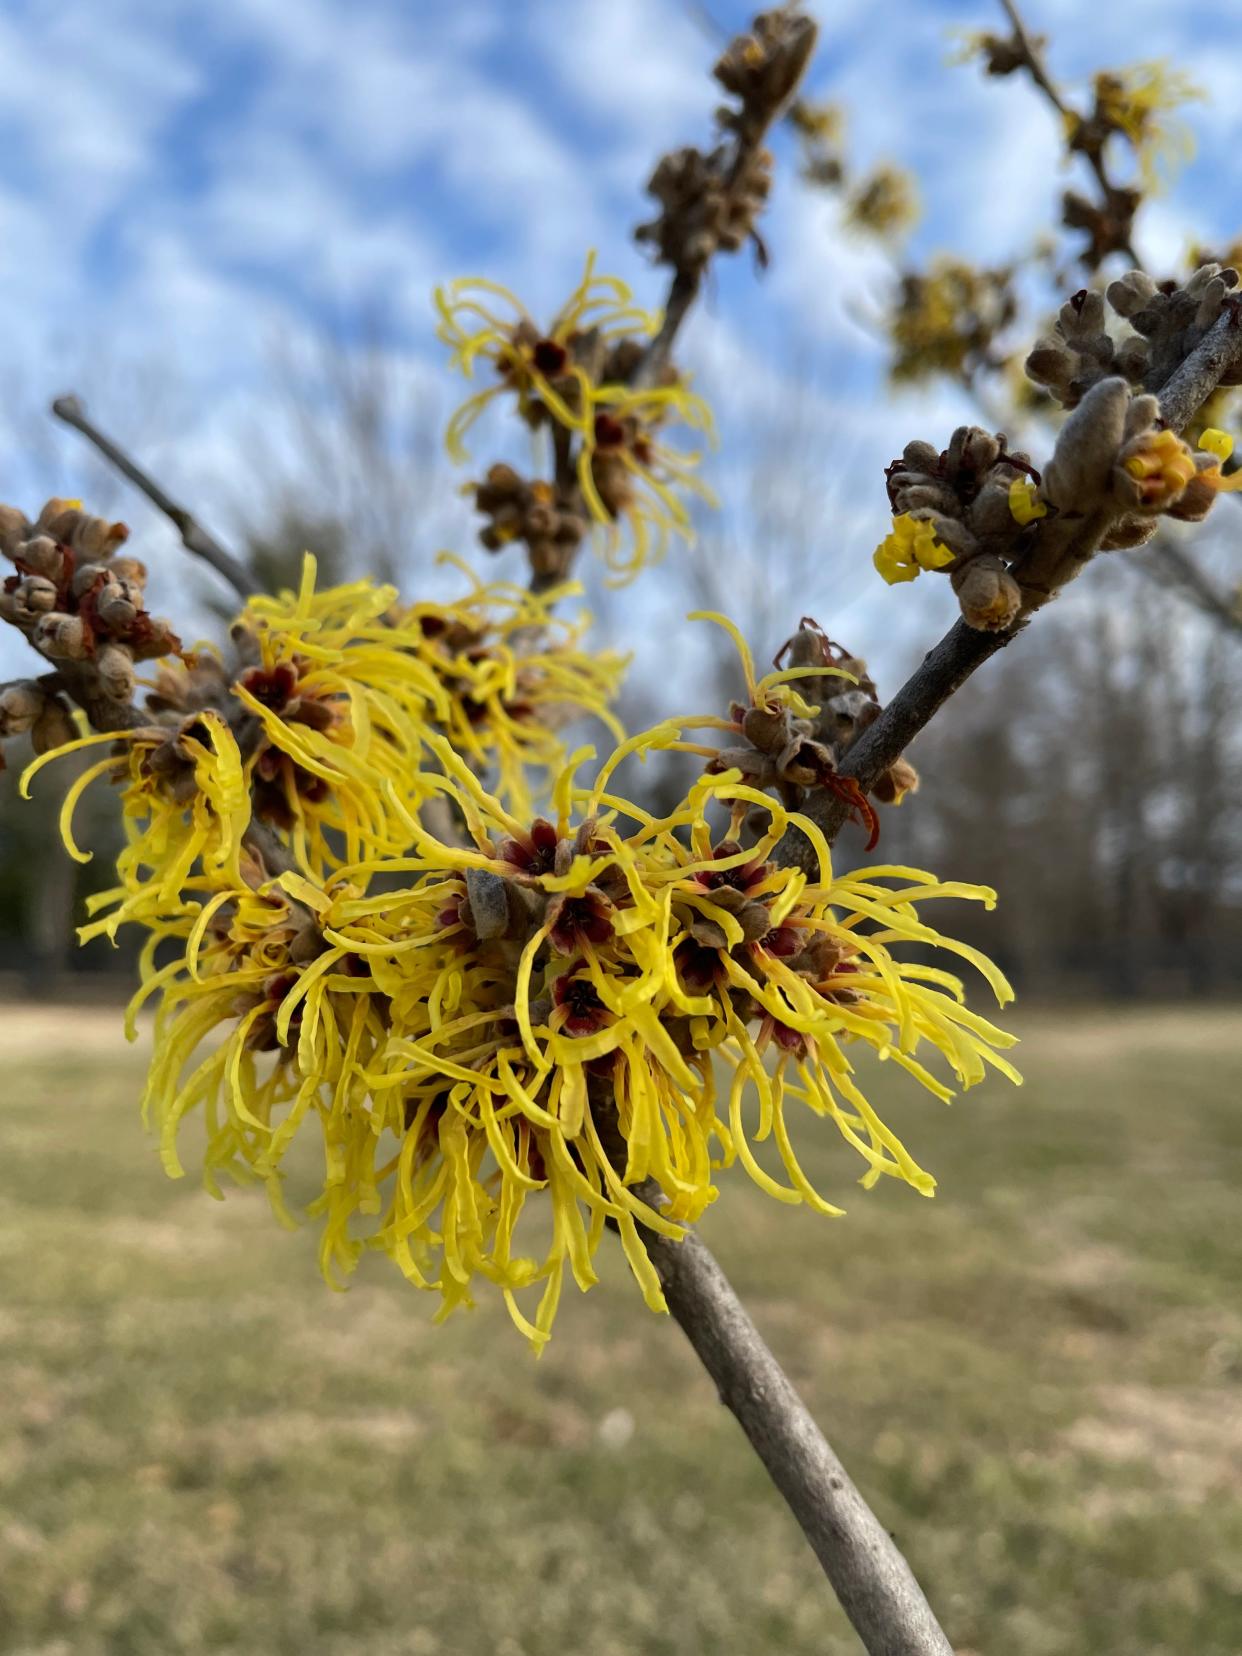 Wisley Supreme witch hazel is one of the brightest of the yellow-flowered, winter-blooming witch hazels. It is also one of the most fragrant.